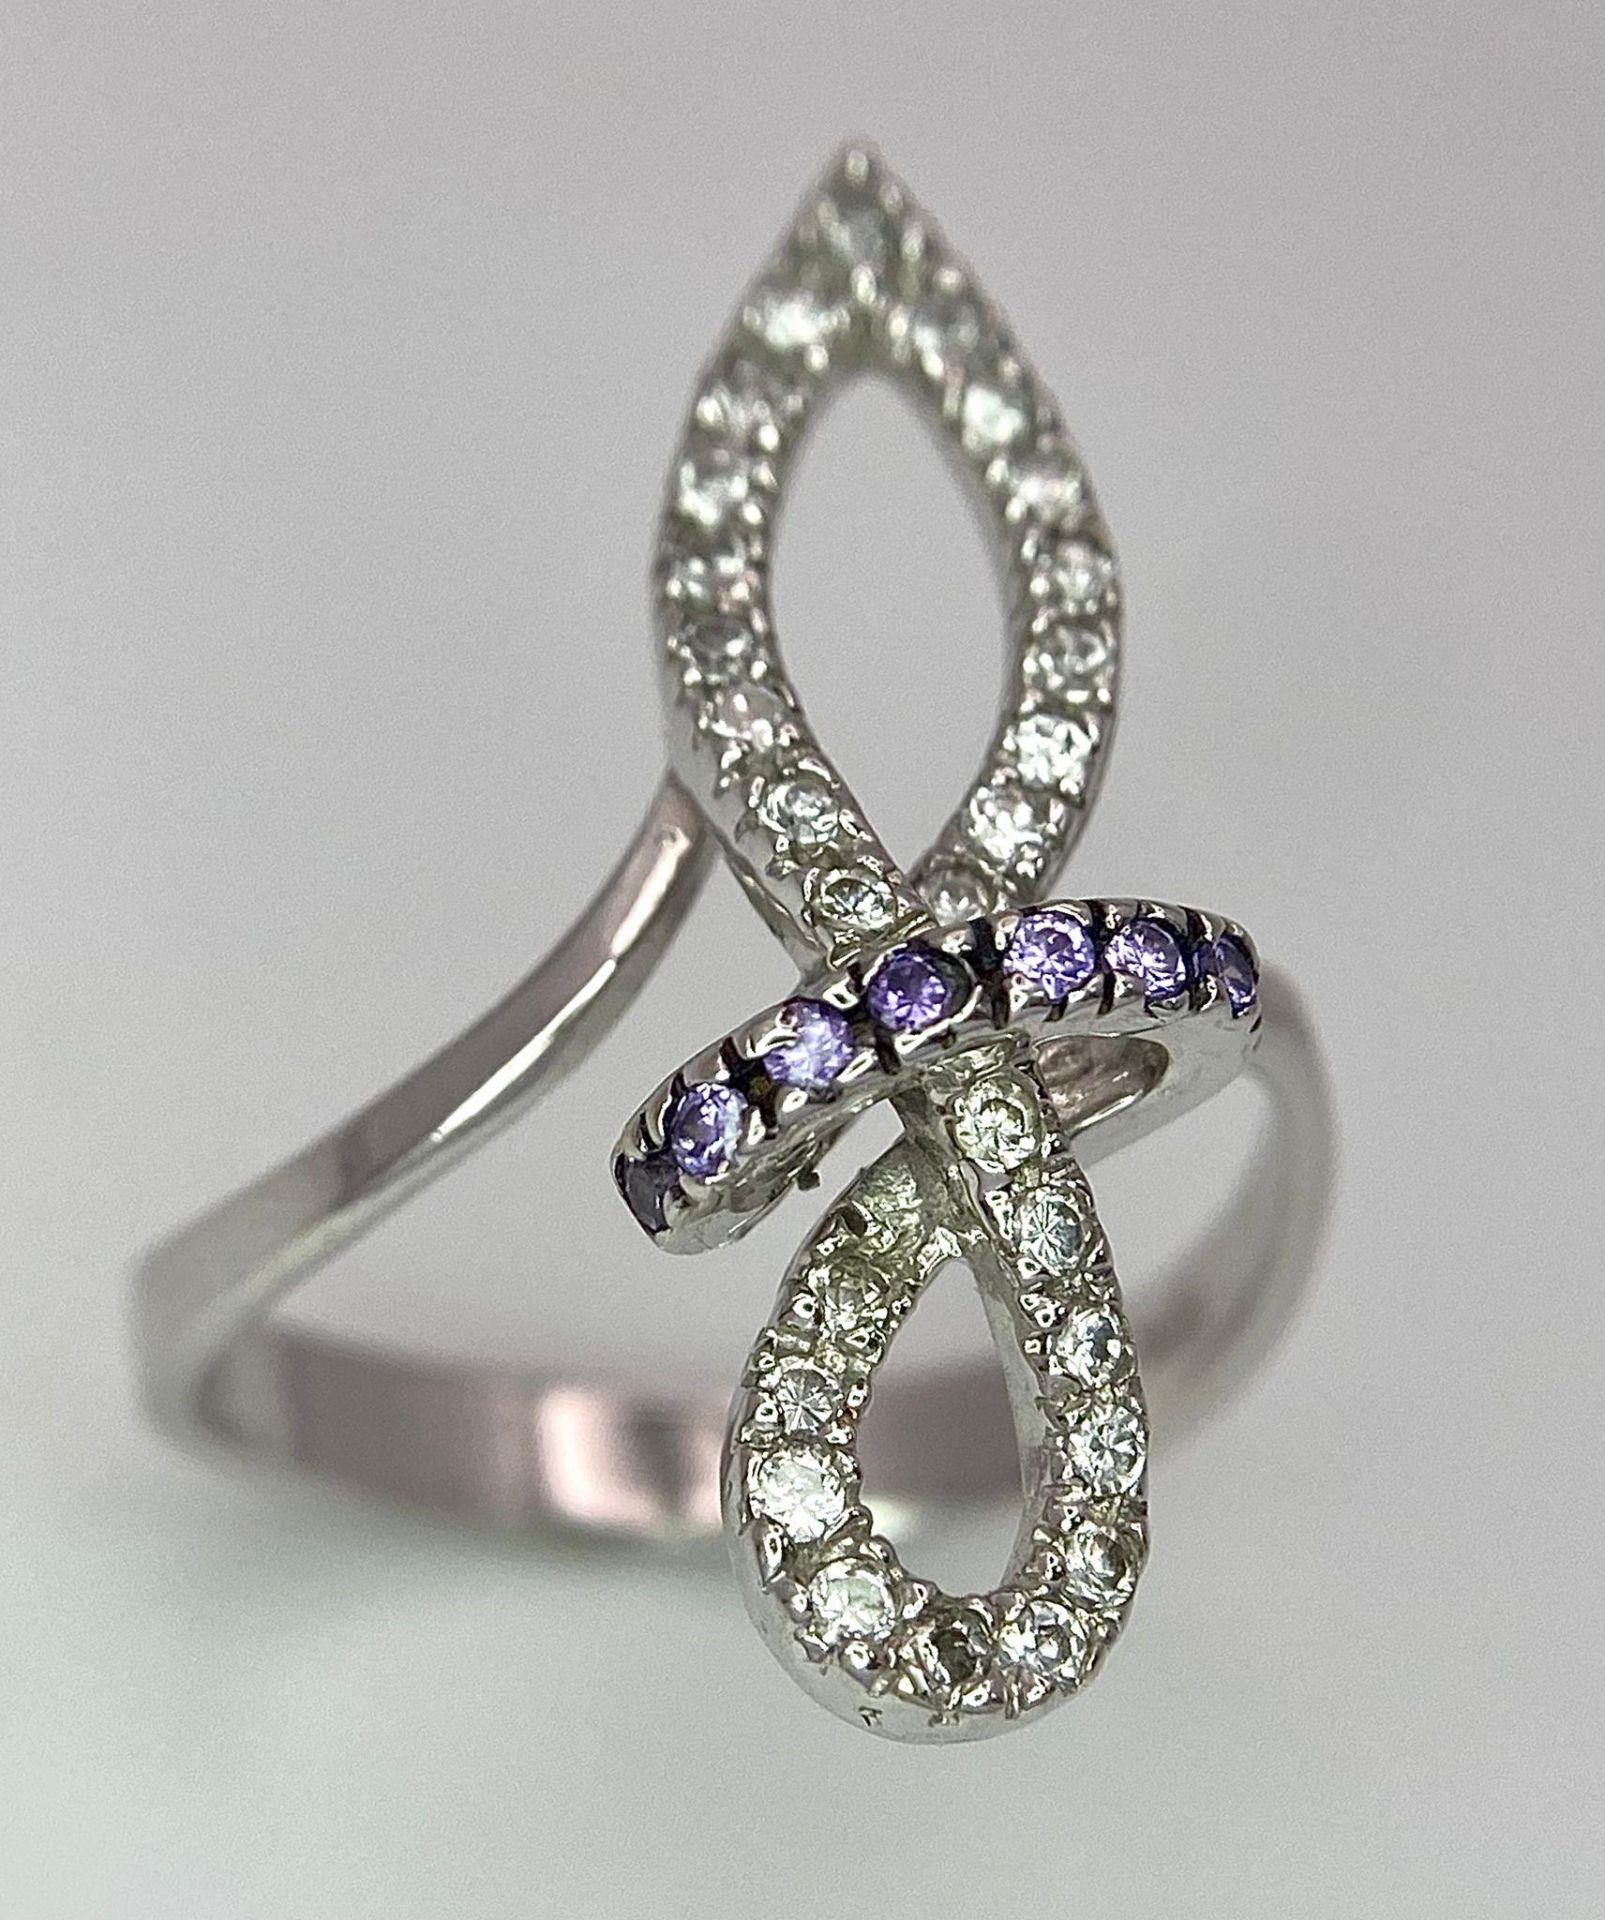 An 18K White Gold CZ Fancy Knot Ring. Size O. 3.9g weight.